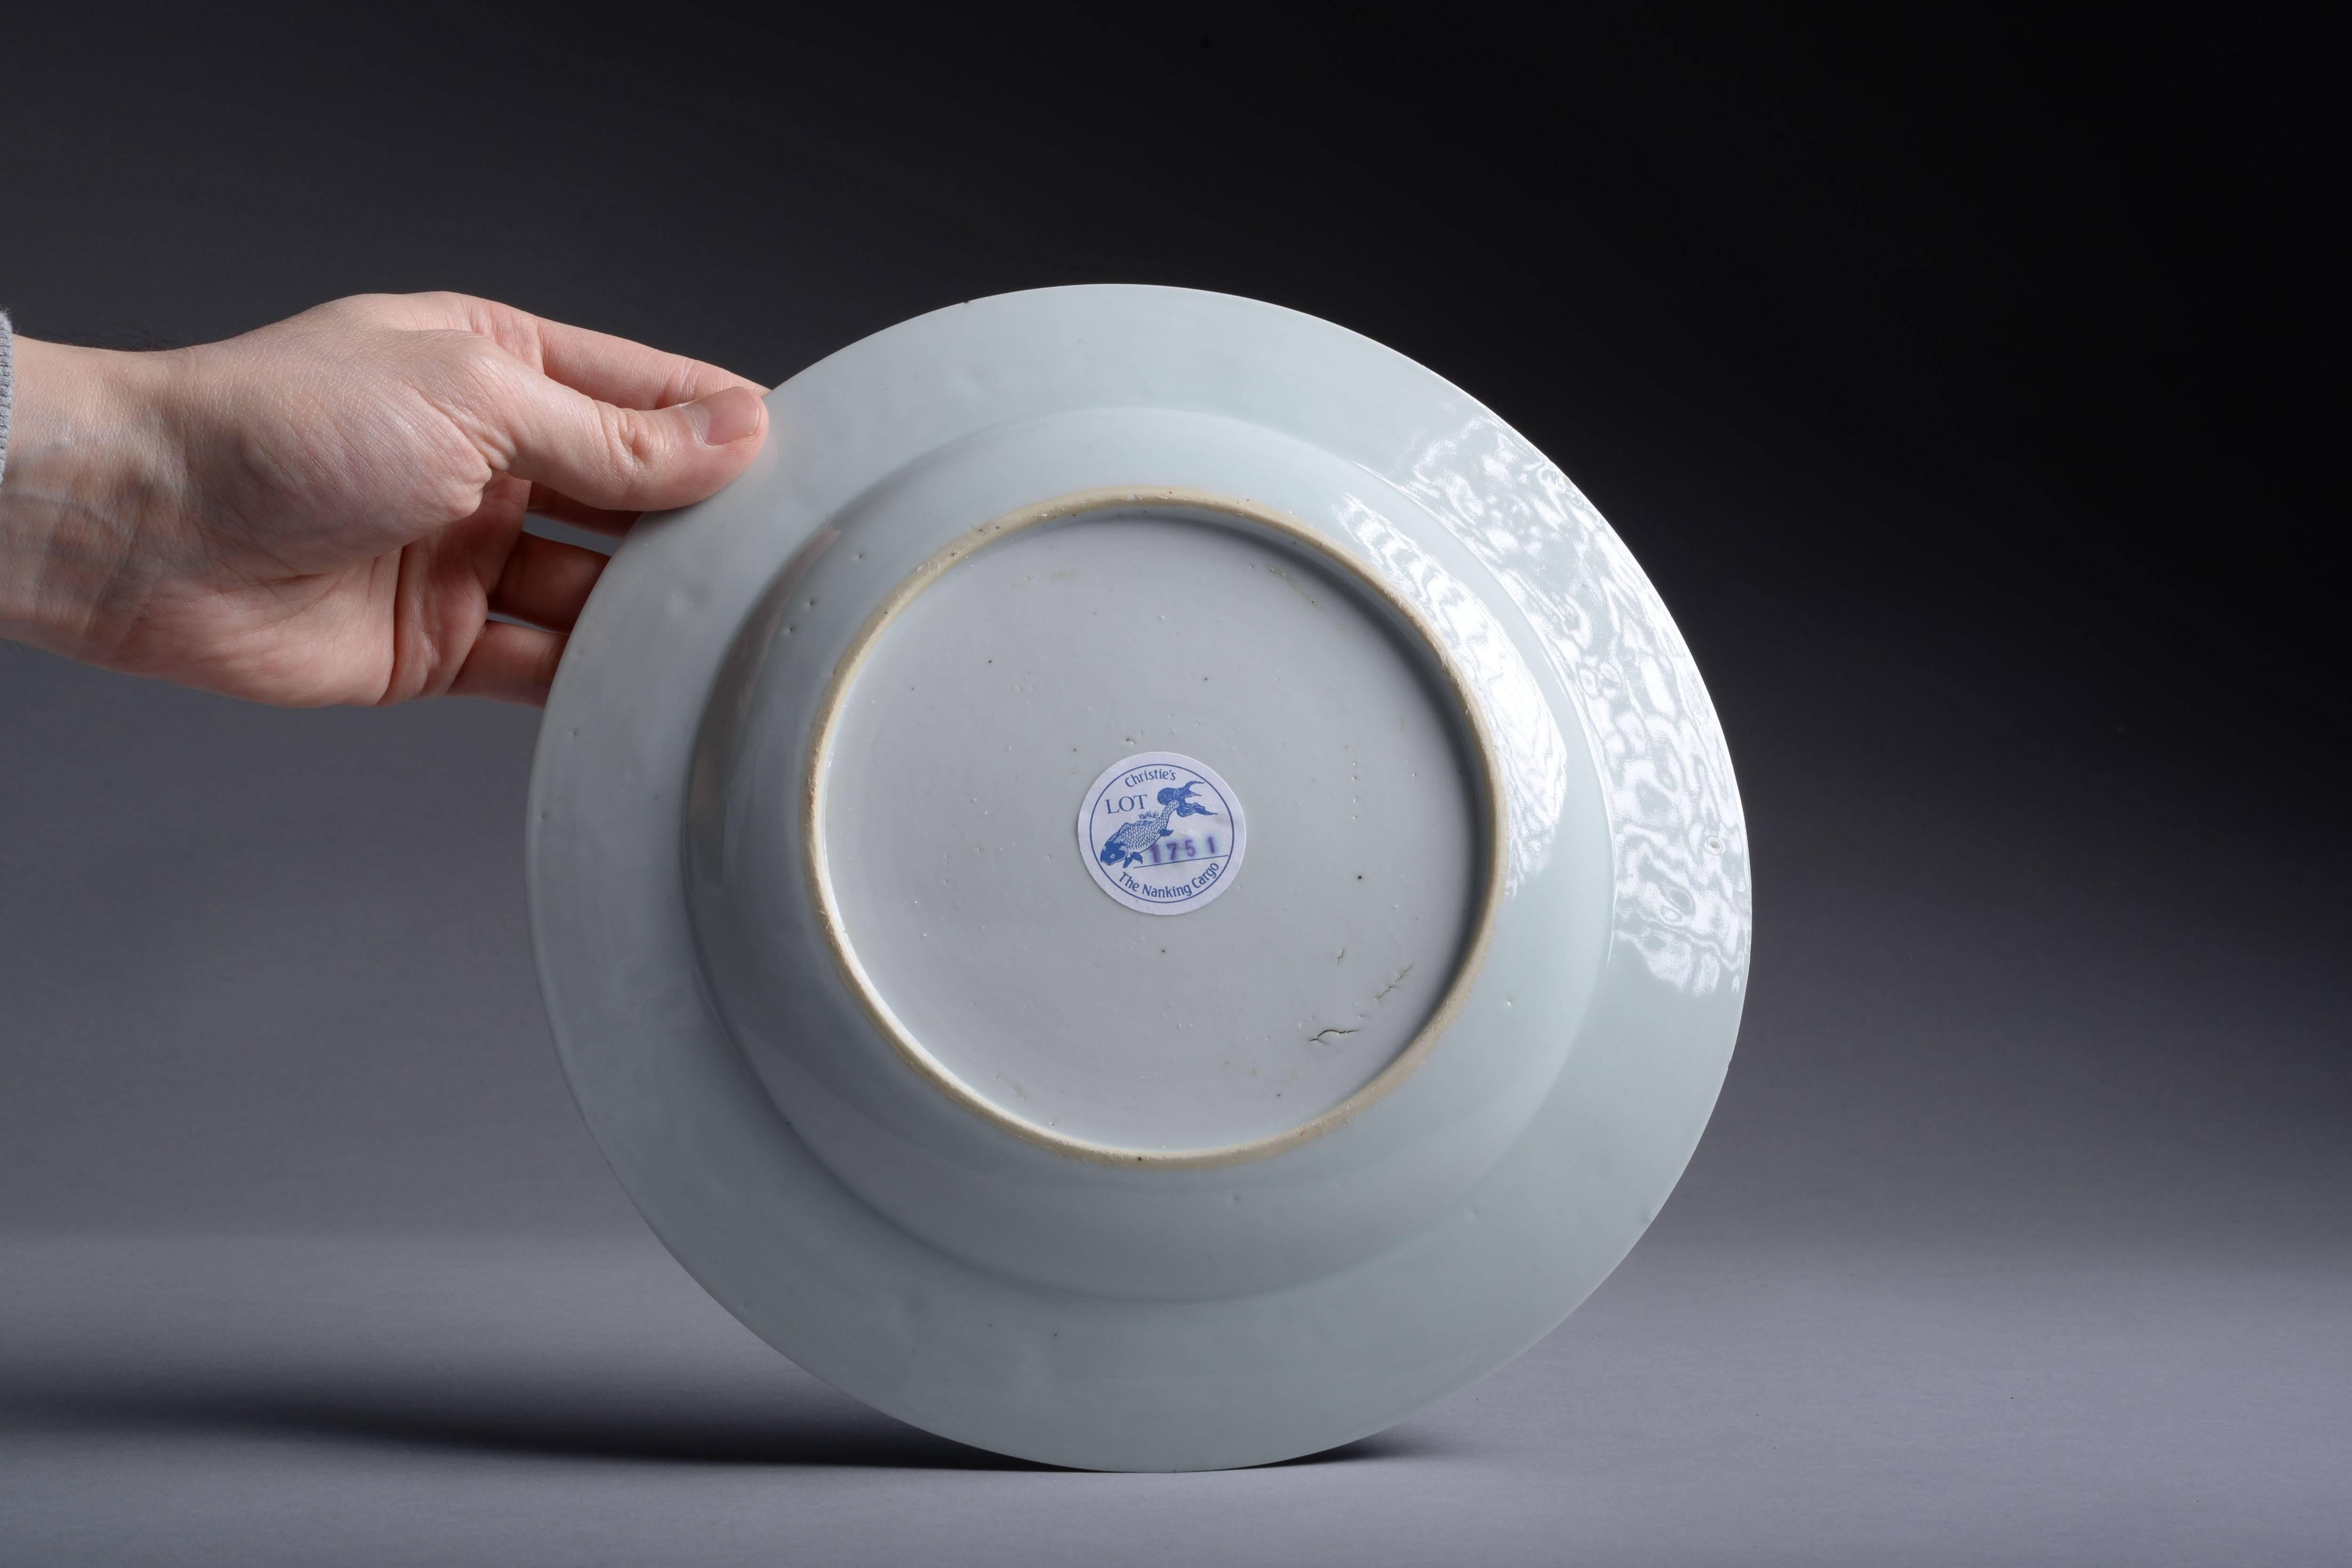 A wonderful, vibrant, Chinese blue on white porcelain dinner plate, dating to circa 1750 and salvaged from the famous Nanking cargo - an officially recorded piece with Christie's sticker and inventory number.

The centre of the plate is decorated